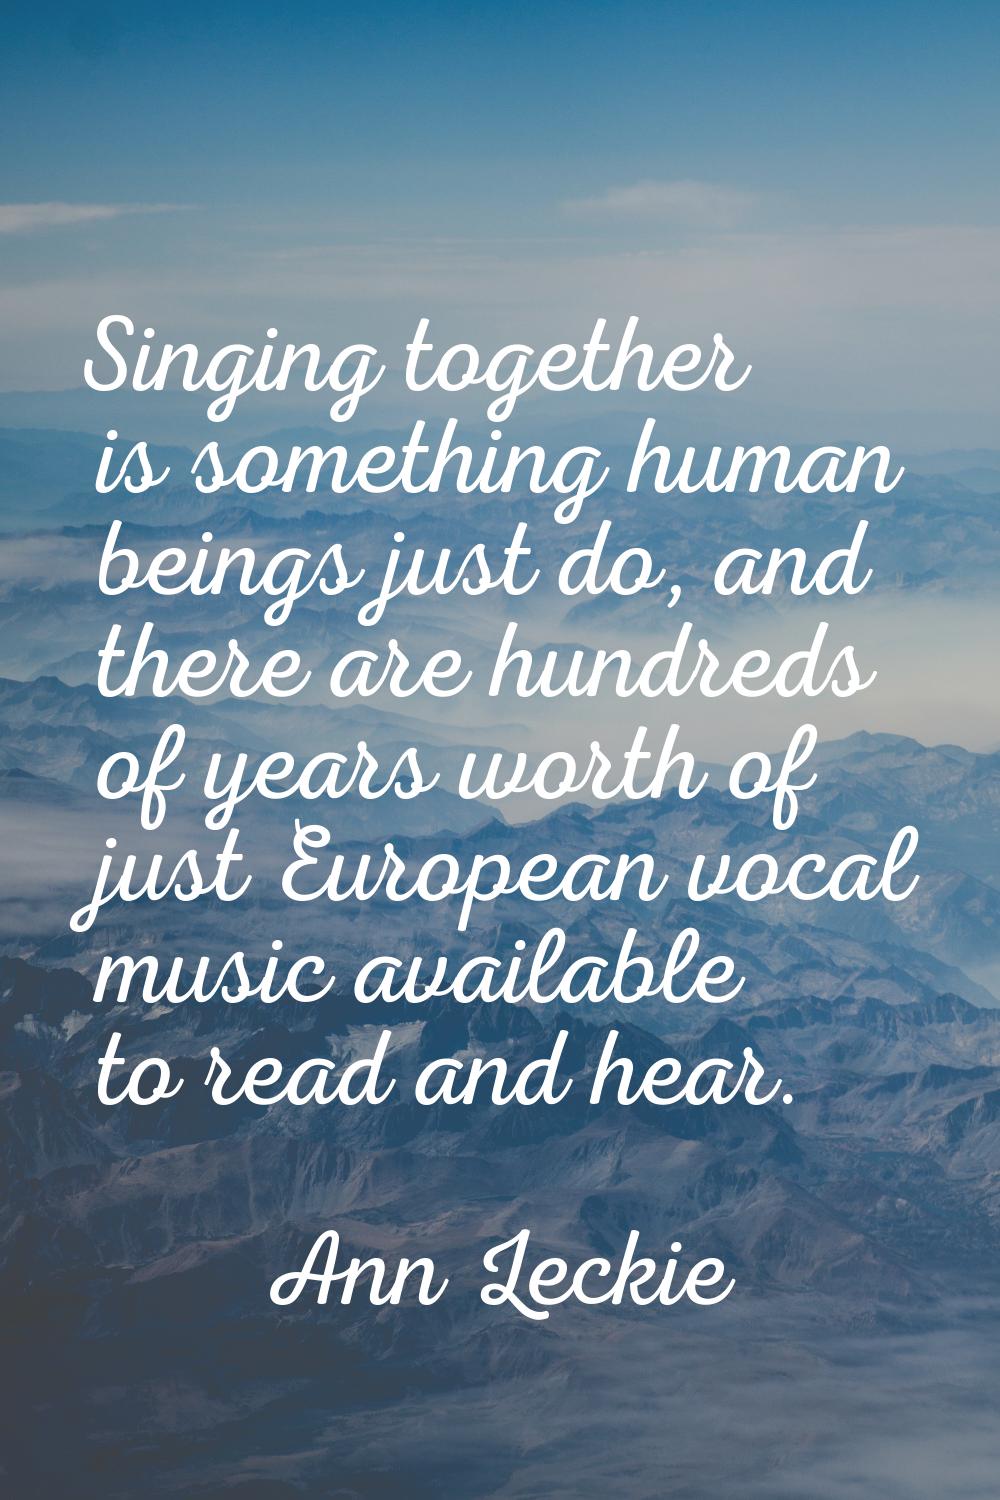 Singing together is something human beings just do, and there are hundreds of years worth of just E